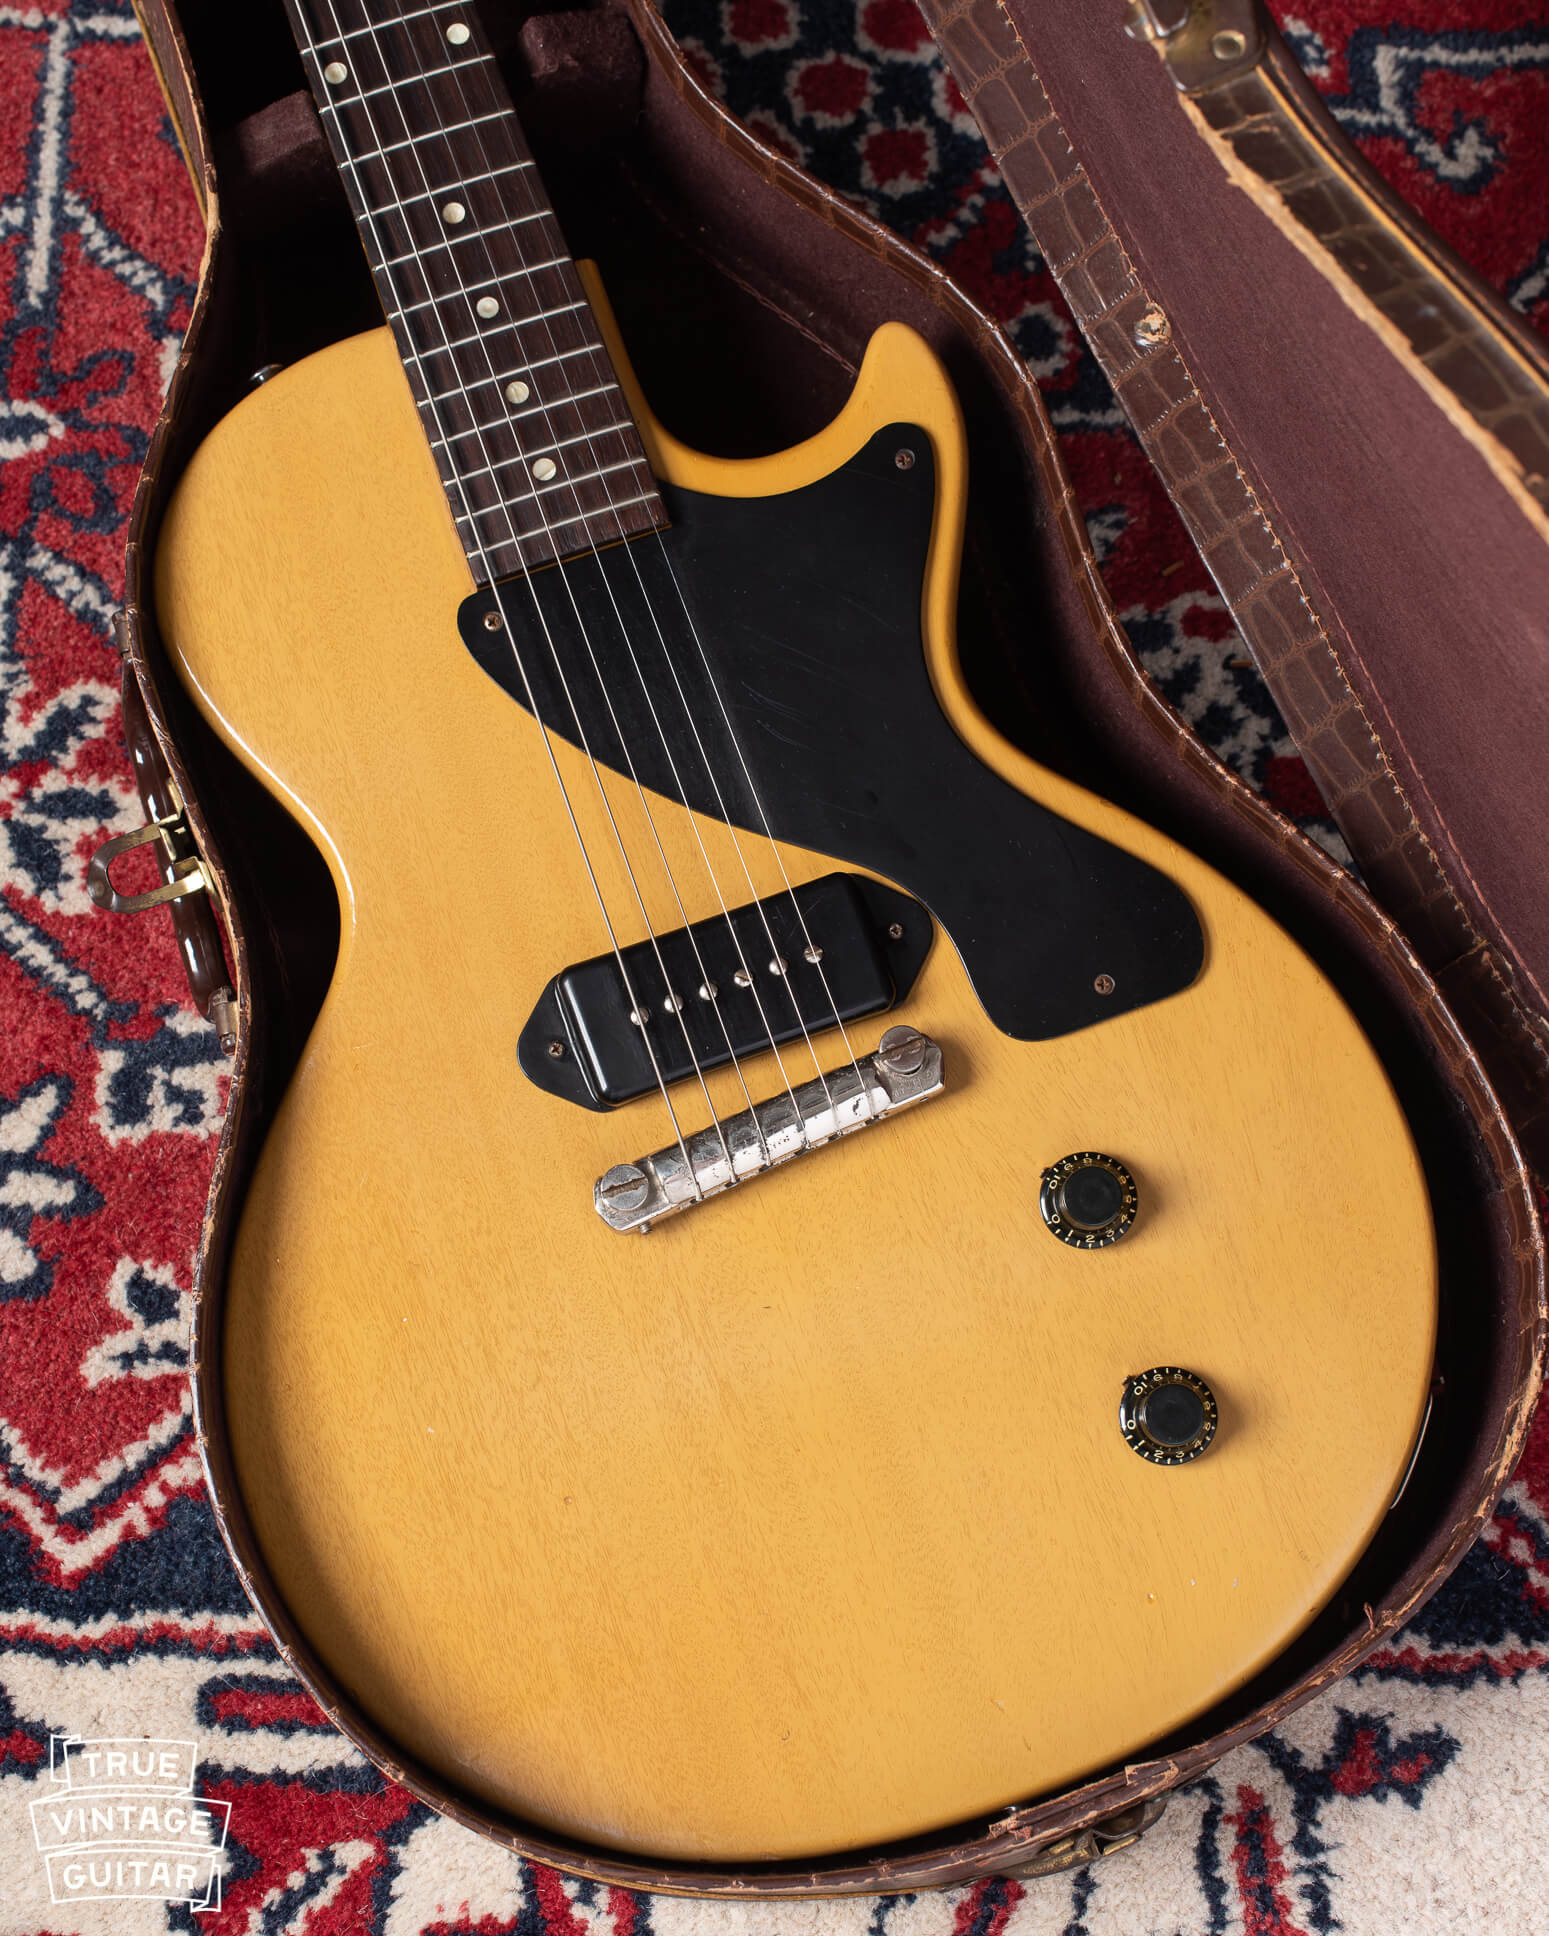 1956 Gibson Les Paul TV guitar in case. Yellow finish with black pickguard.